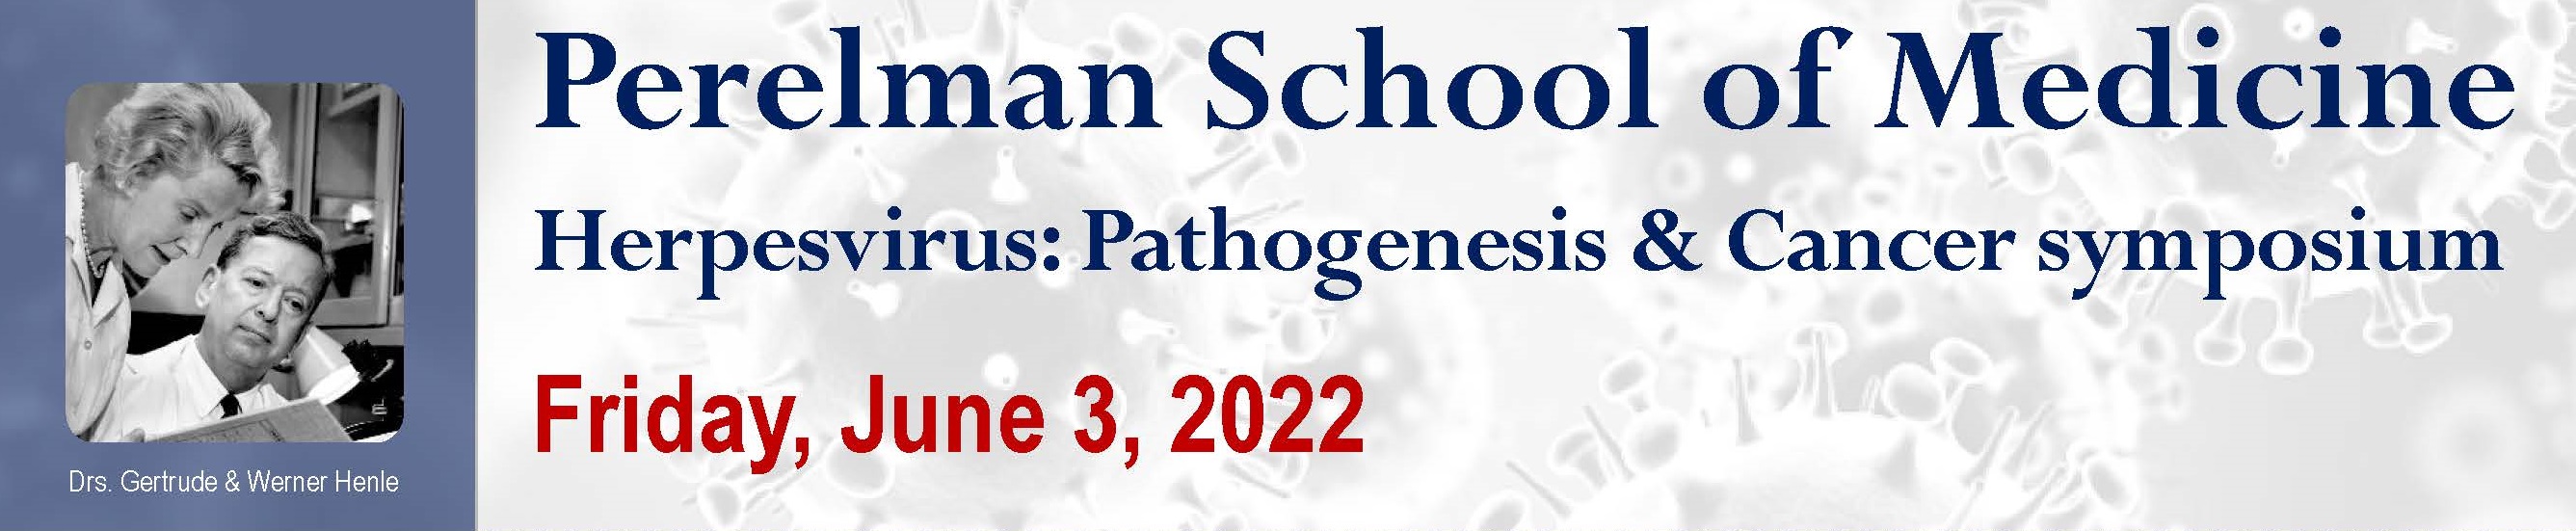 Perelman School of Medicine banner for Herpesvirus: Pathogenesis and cancer symposium on Friday, June 3 on 2022 with a photo of doctors Gertrude and Werner Henle